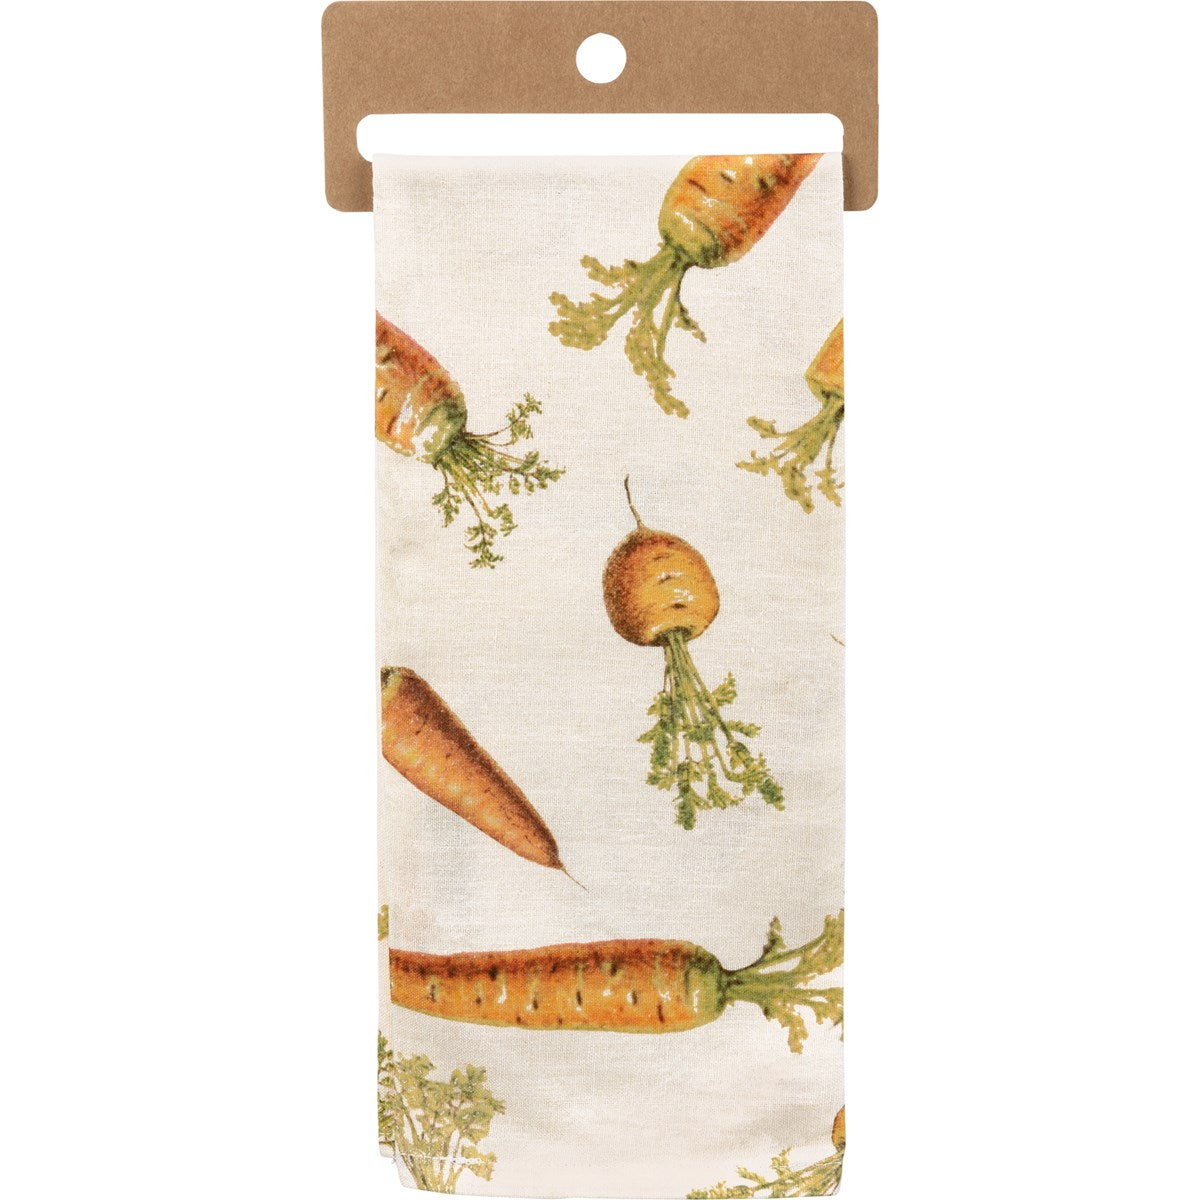 Towel - I Don't Carrot All